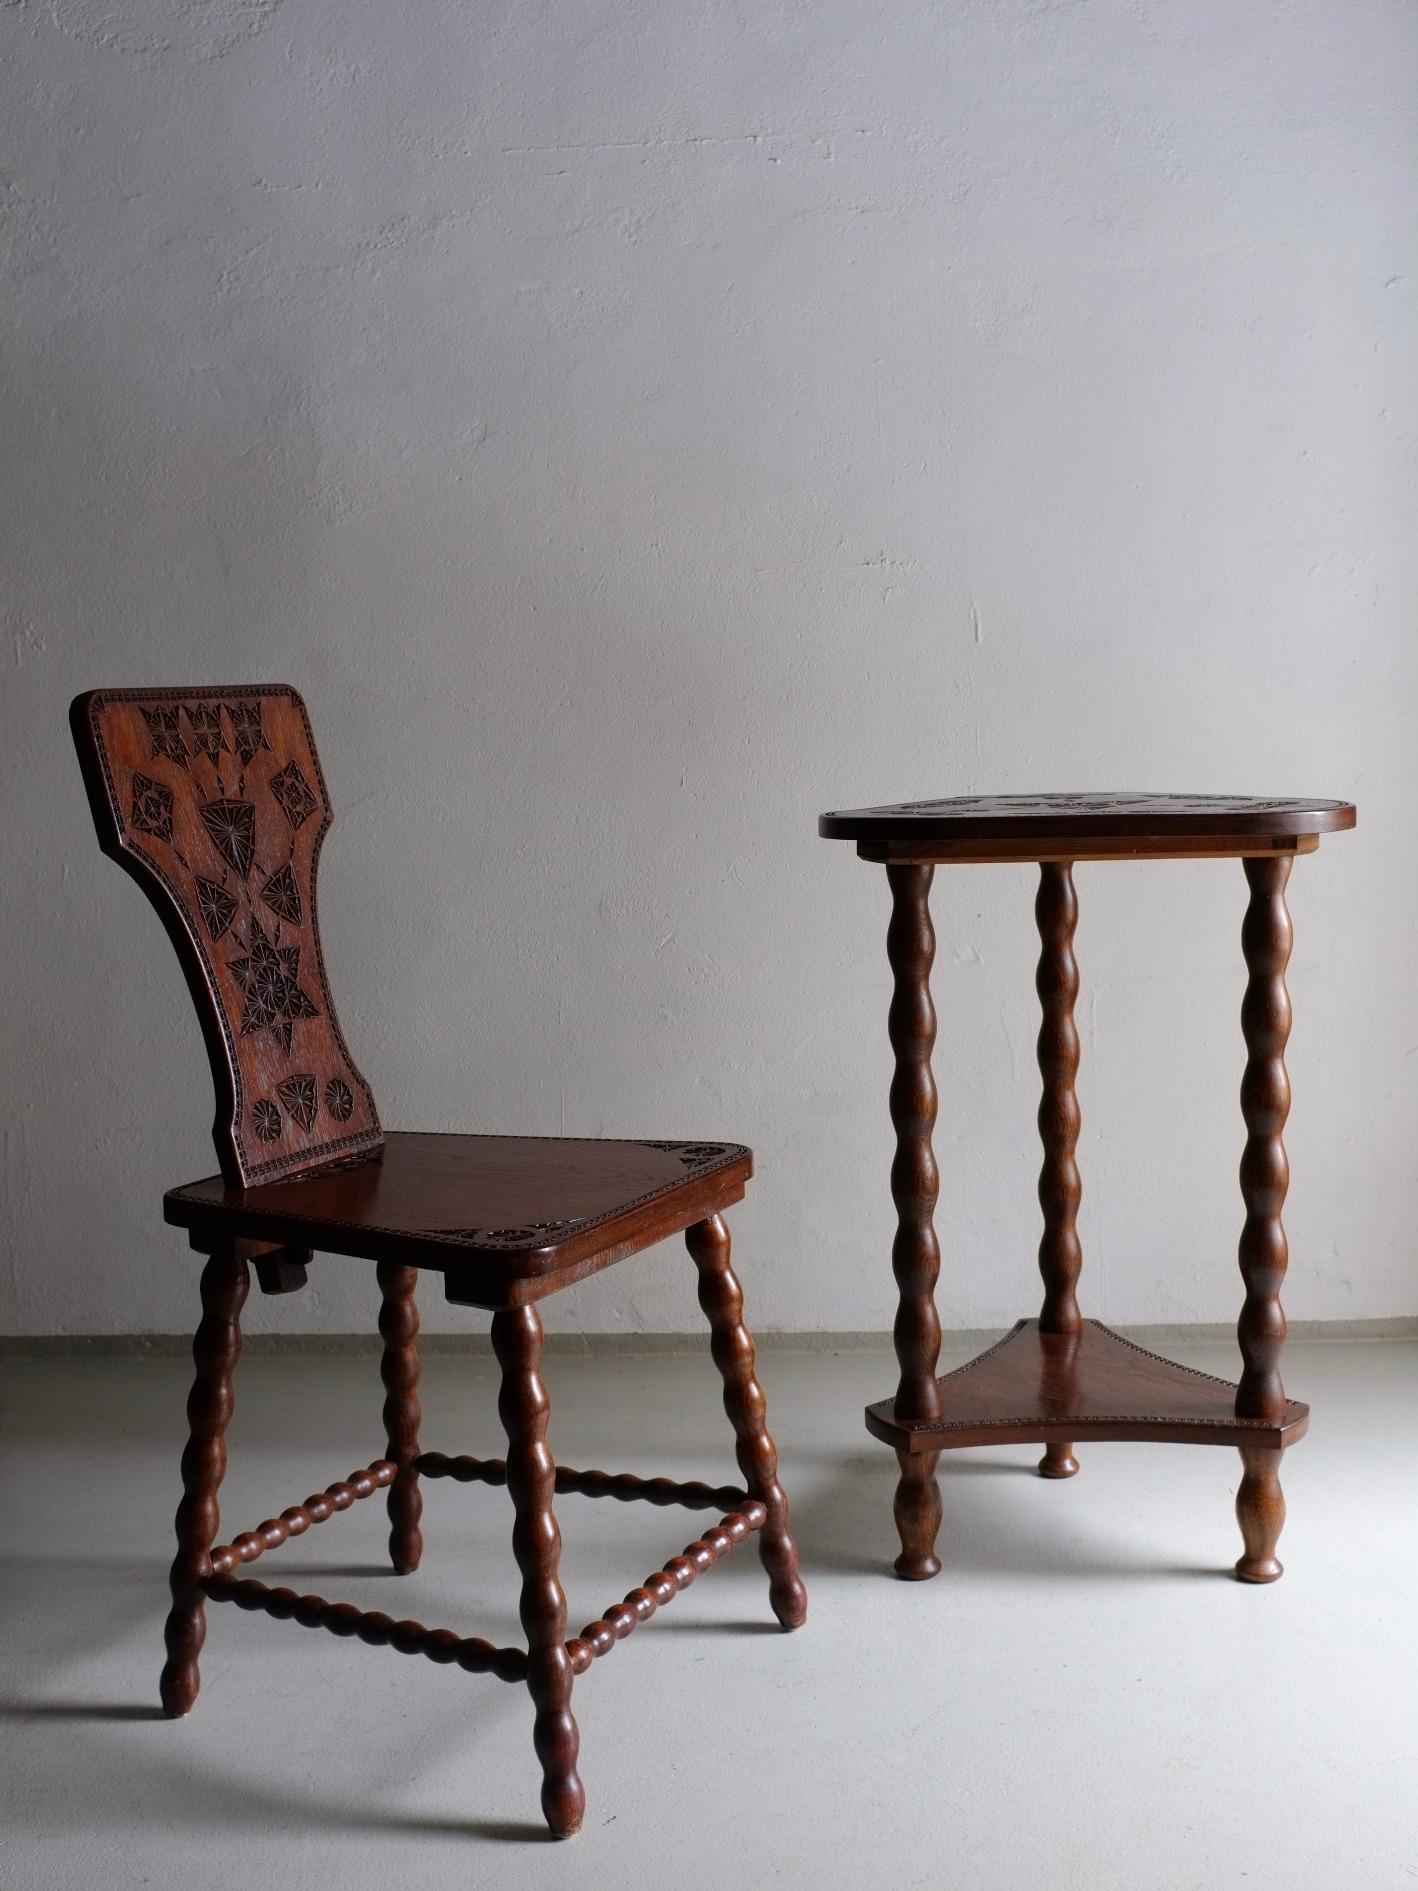 Carved oak wood chair and table set with bobbin-turned legs.
Chair: H 90 cm, H(seat) 46 cm, W 42 cm, D 45 cm
Table: H 76 cm, W 48 cm, D 48 cm.